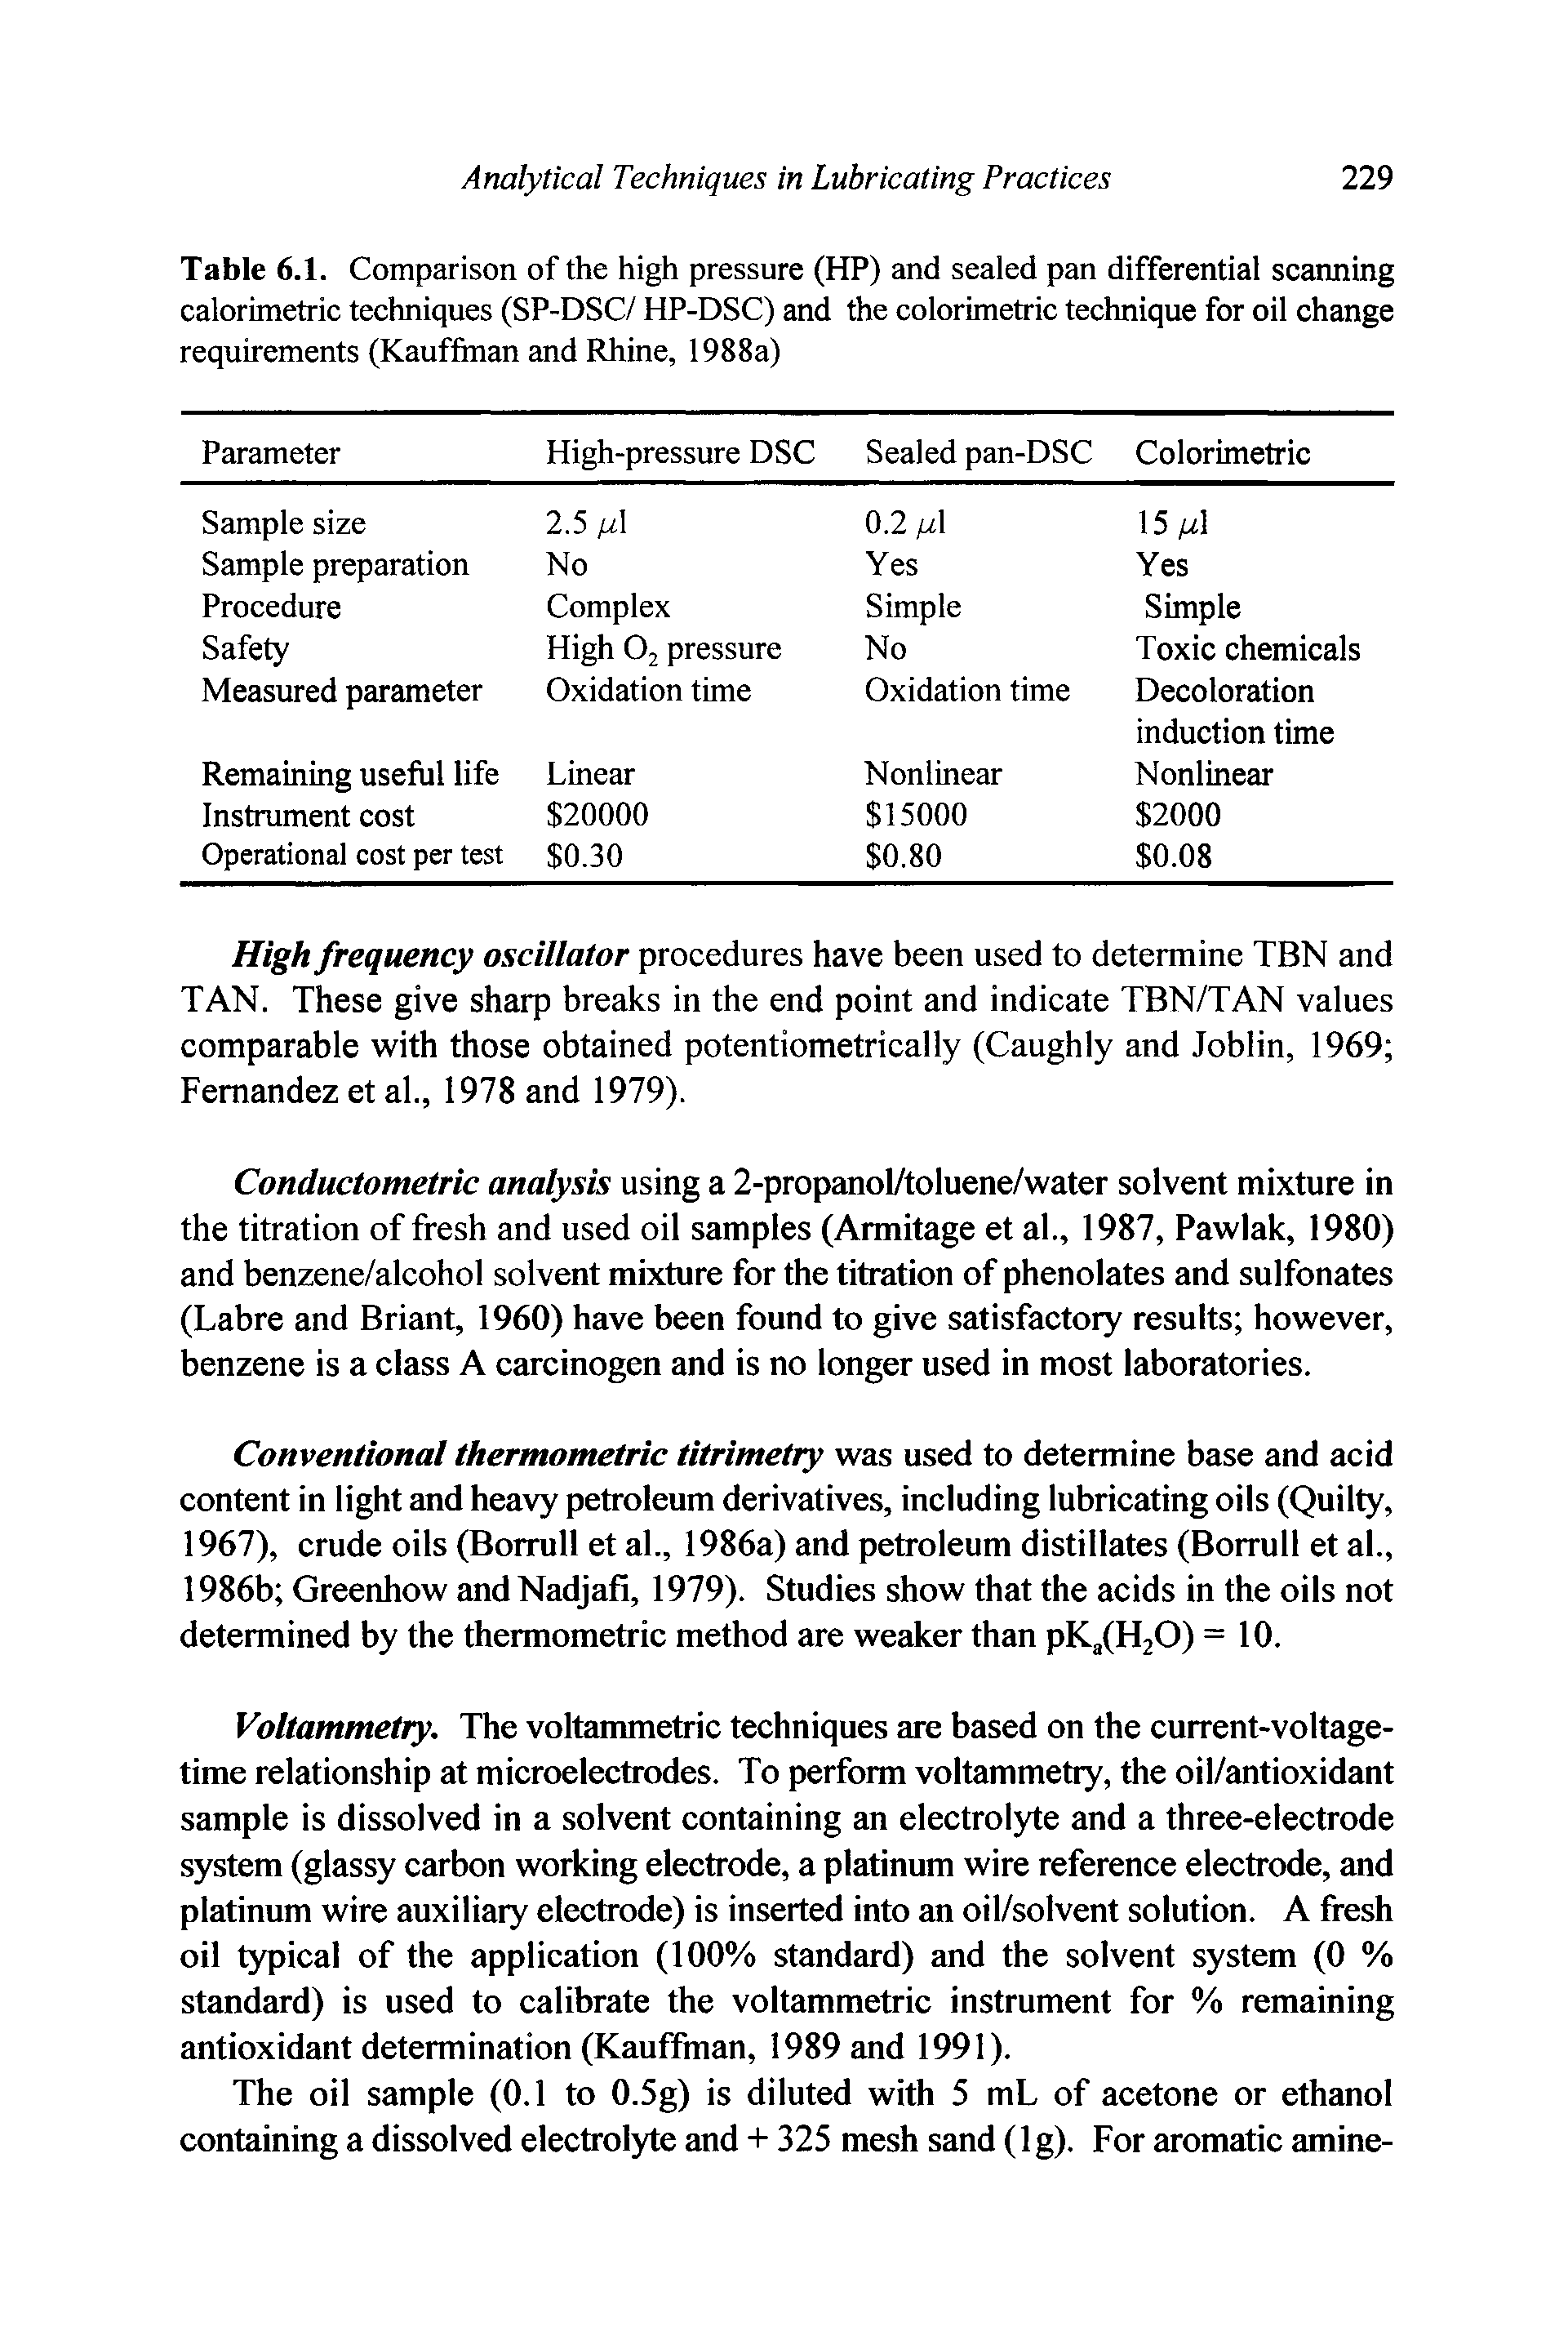 Table 6.1. Comparison of the high pressure (HP) and sealed pan differential scanning calorimetric techniques (SP-DSC/ HP-DSC) and the colorimetric technique for oil change requirements (Kauffman and Rhine, 1988a)...